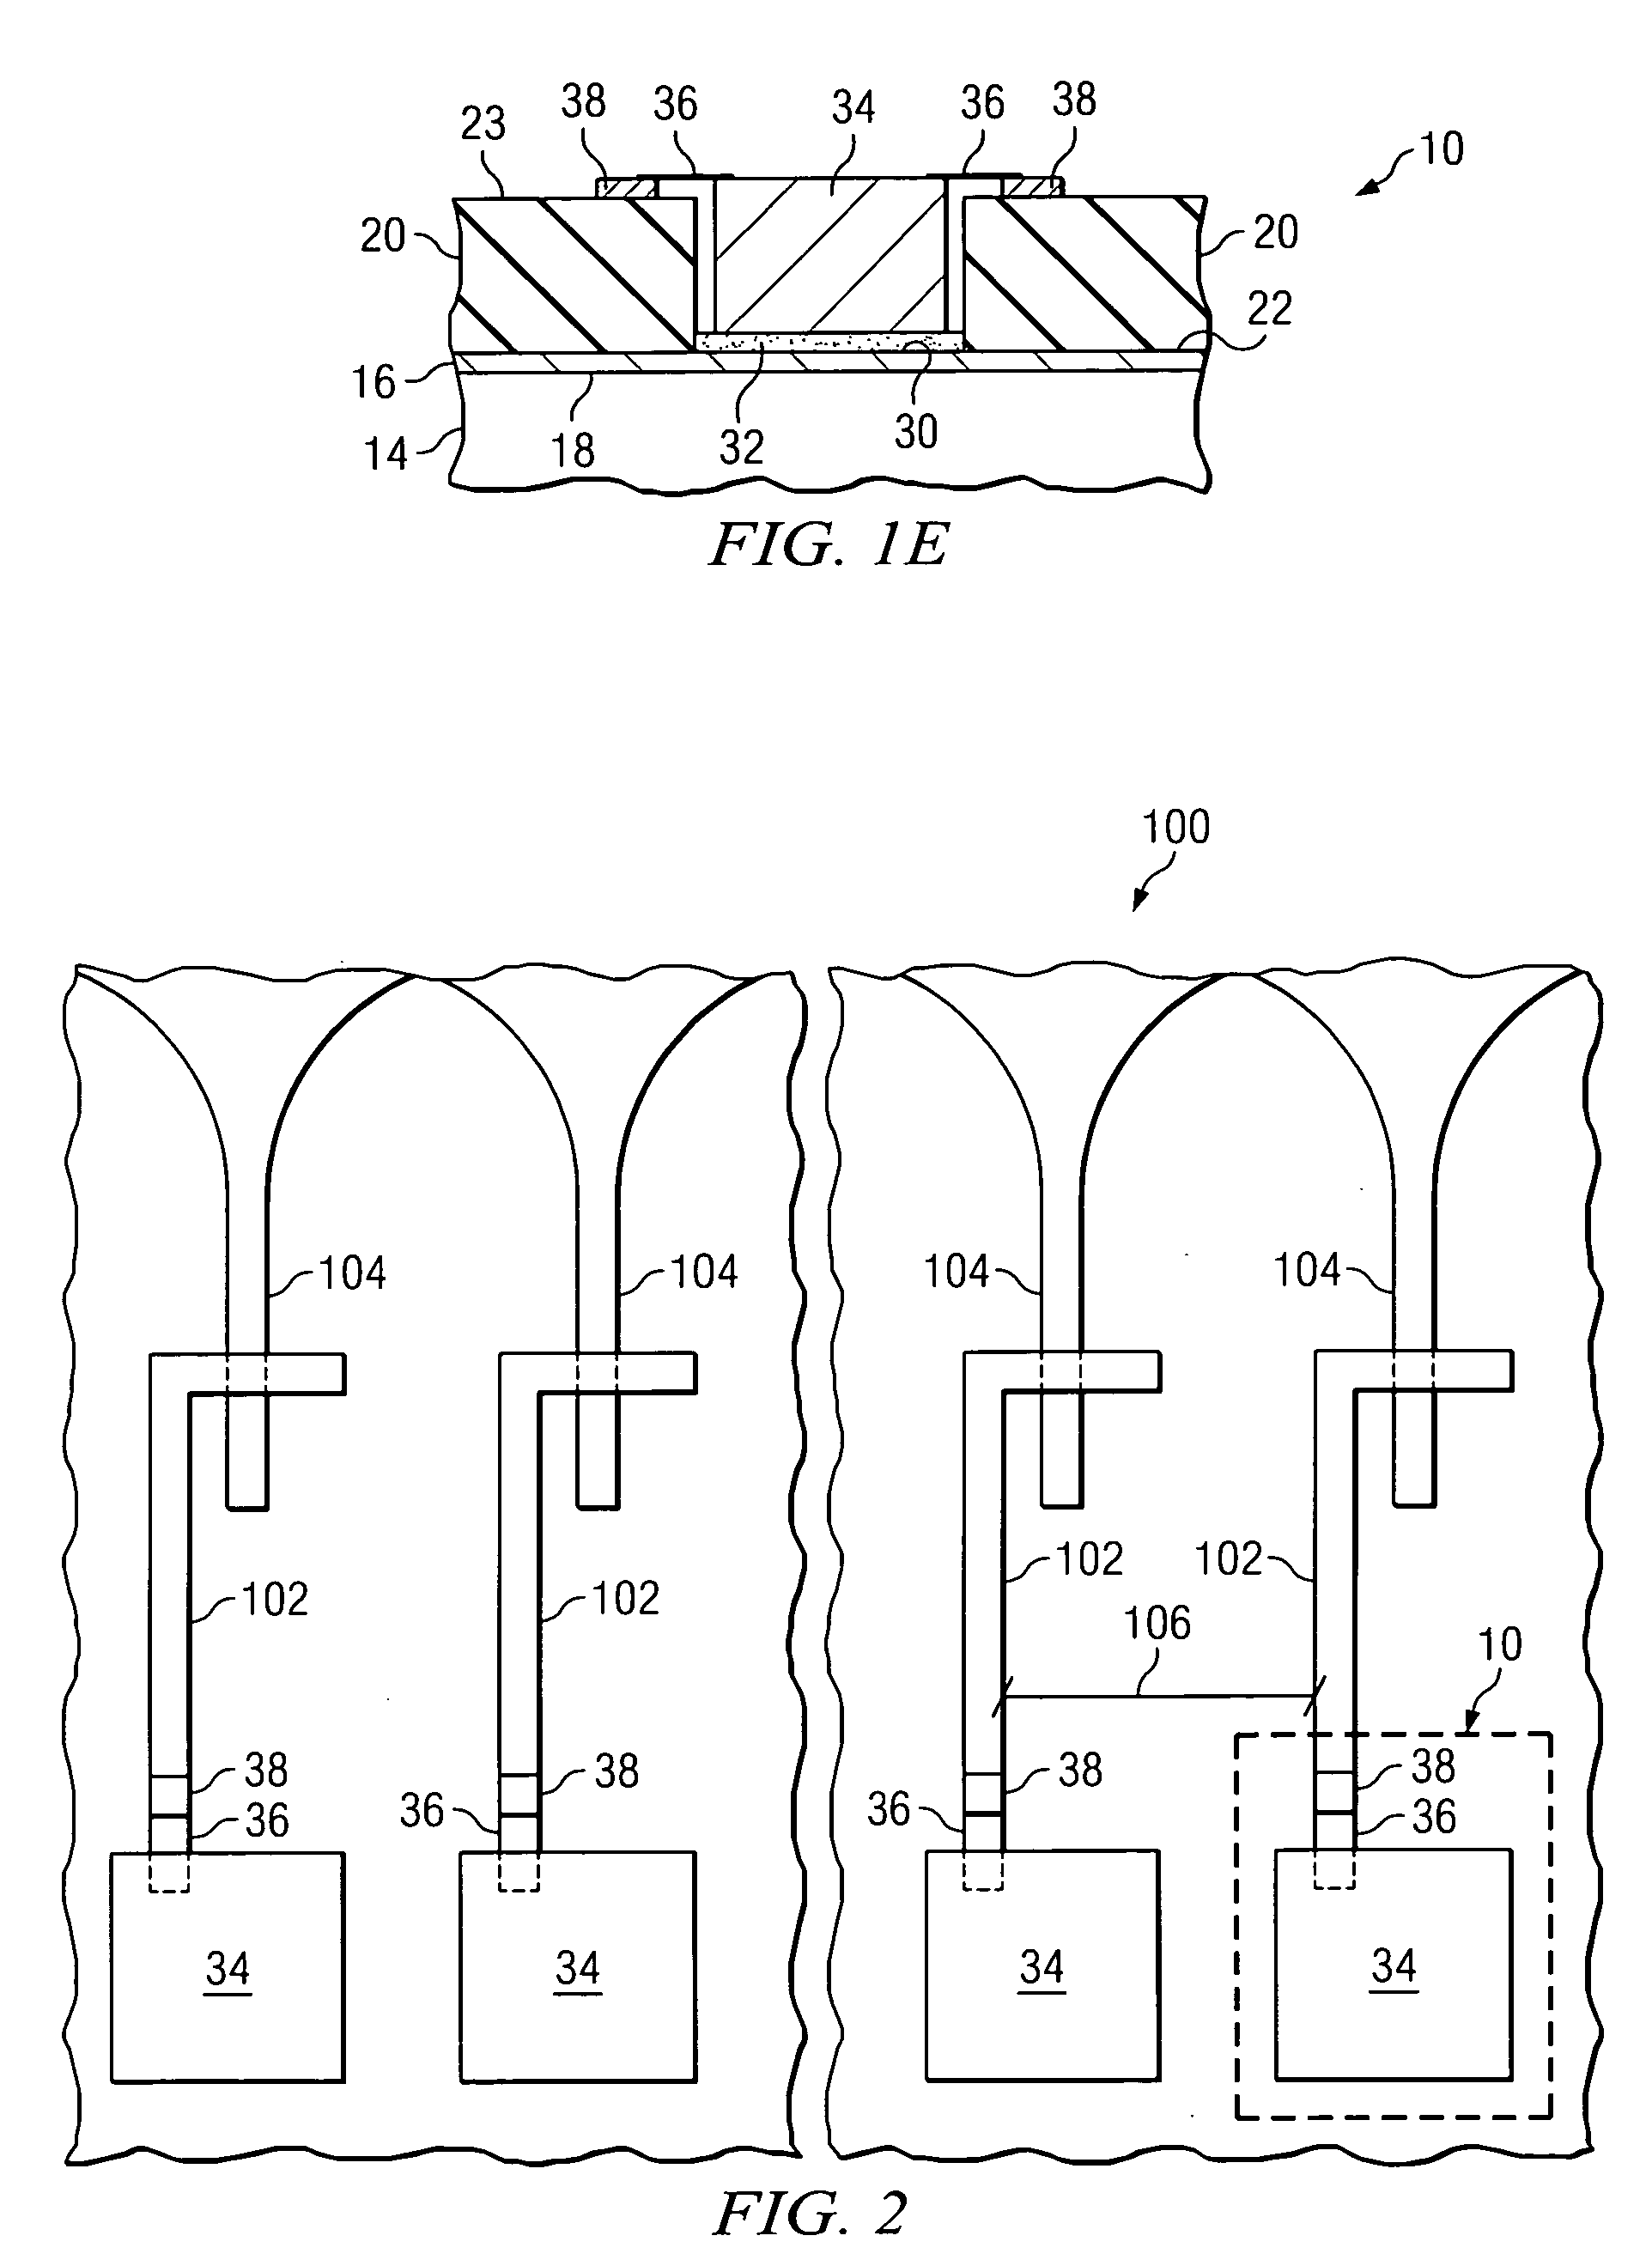 Reduced inductance interconnect for enhanced microwave and millimeter-wave systems